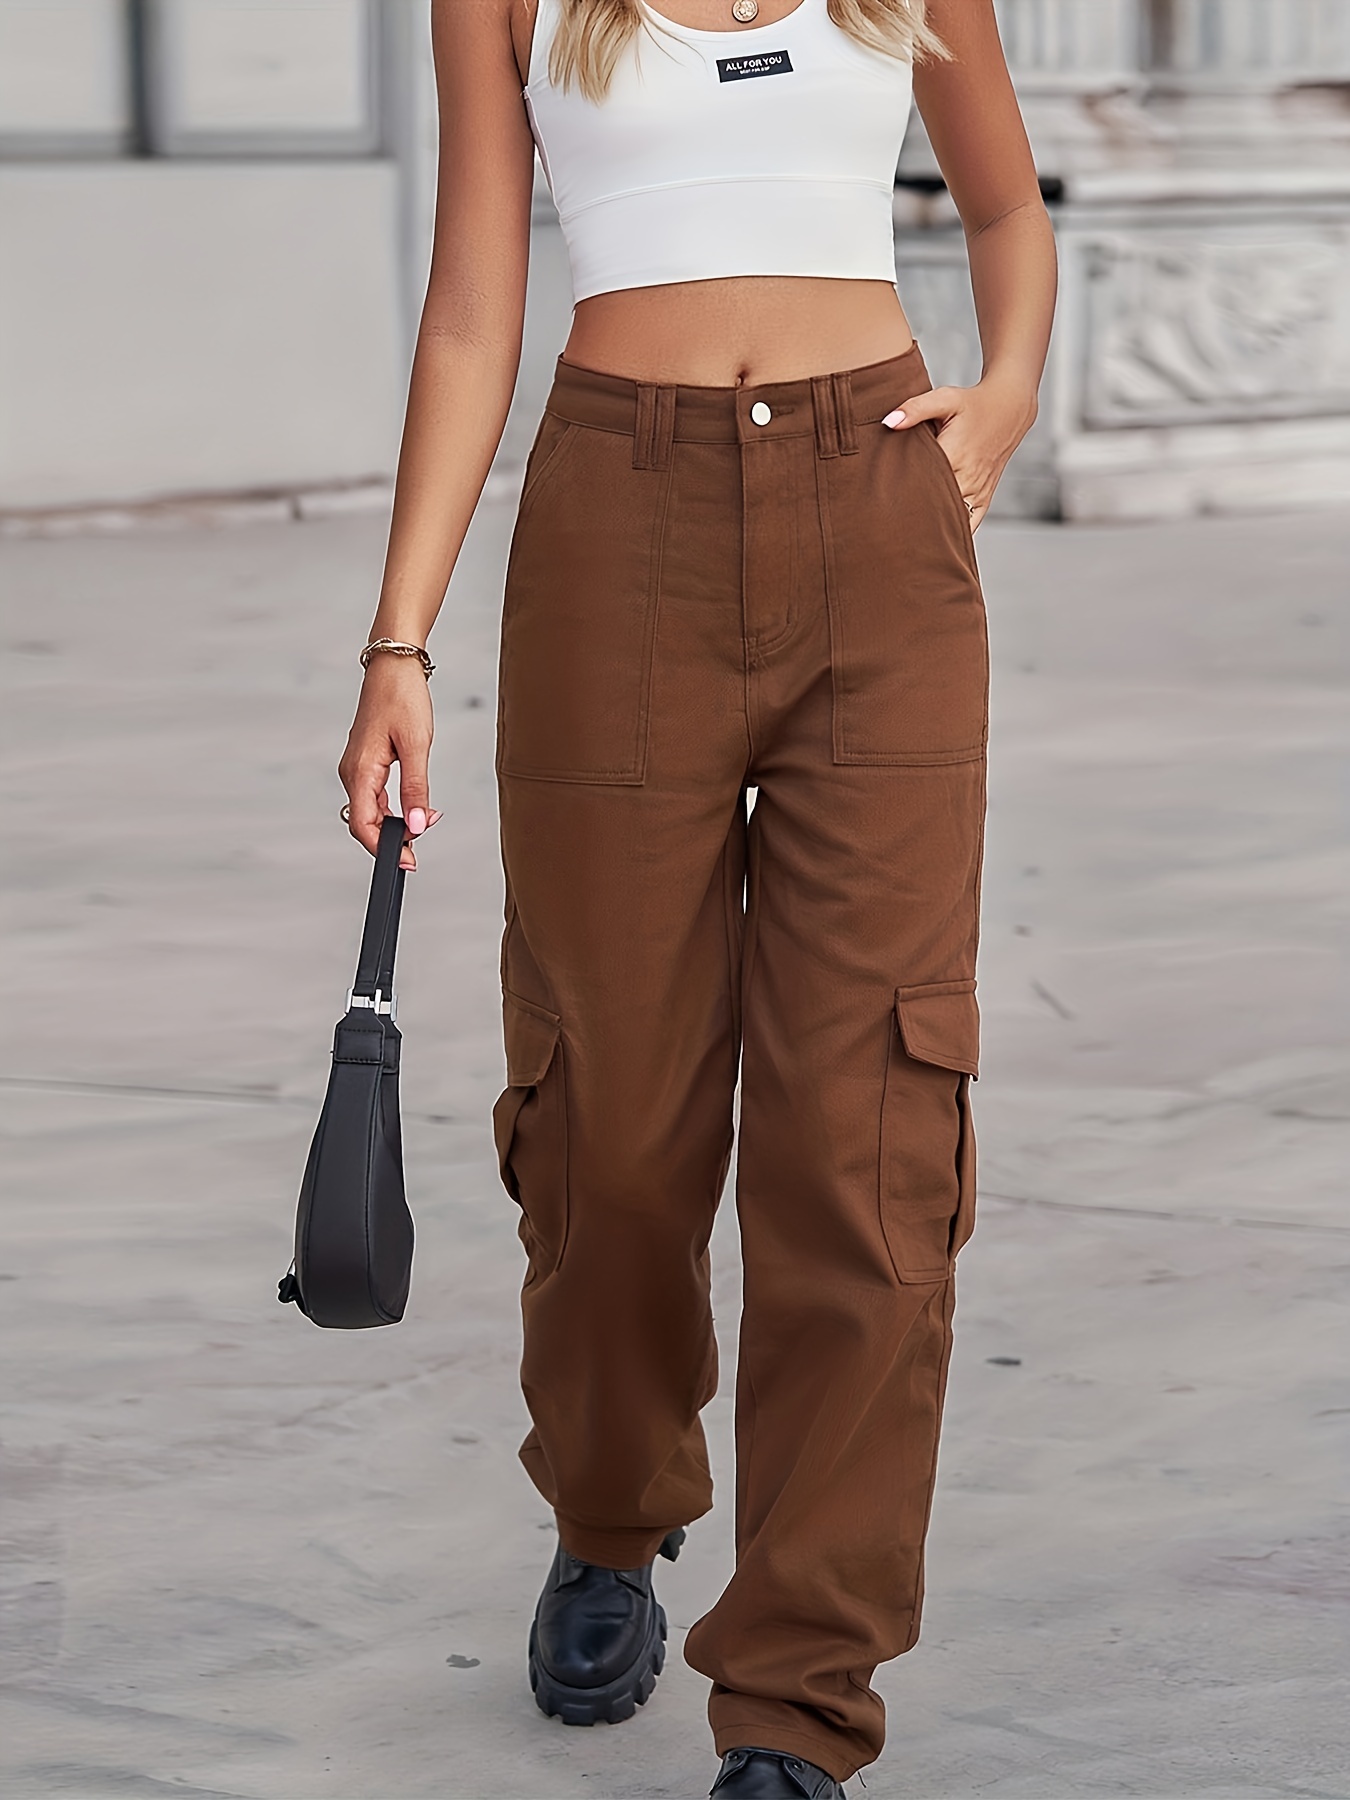 Stylish Brown Low Rise Pants Outfit